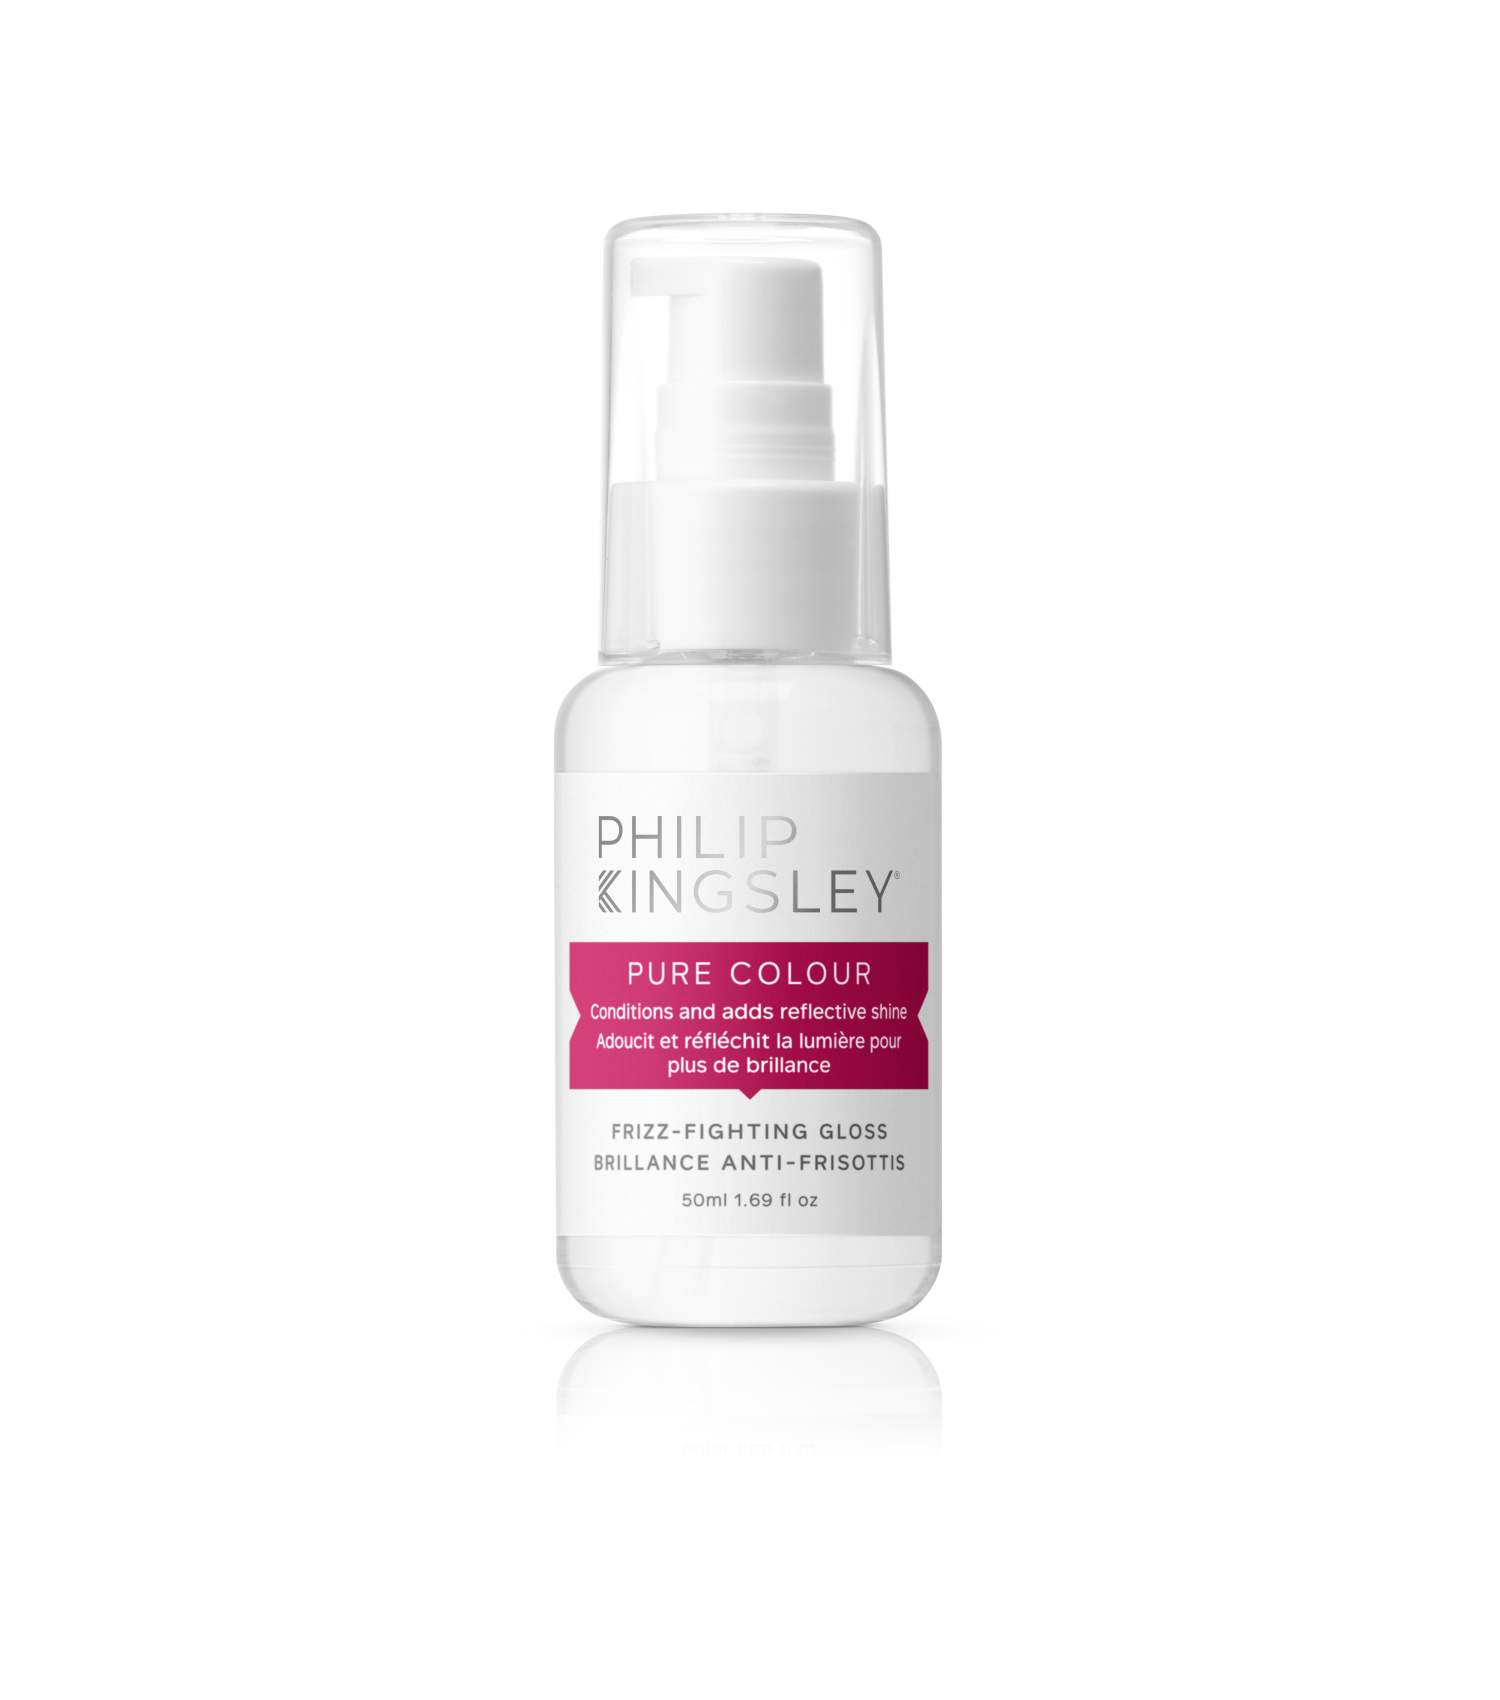 Philip Kingsley Pure Colour Frizz-Fighting Gloss Philip Kingsley Pure Colour Frizz-Fighting Gloss 1